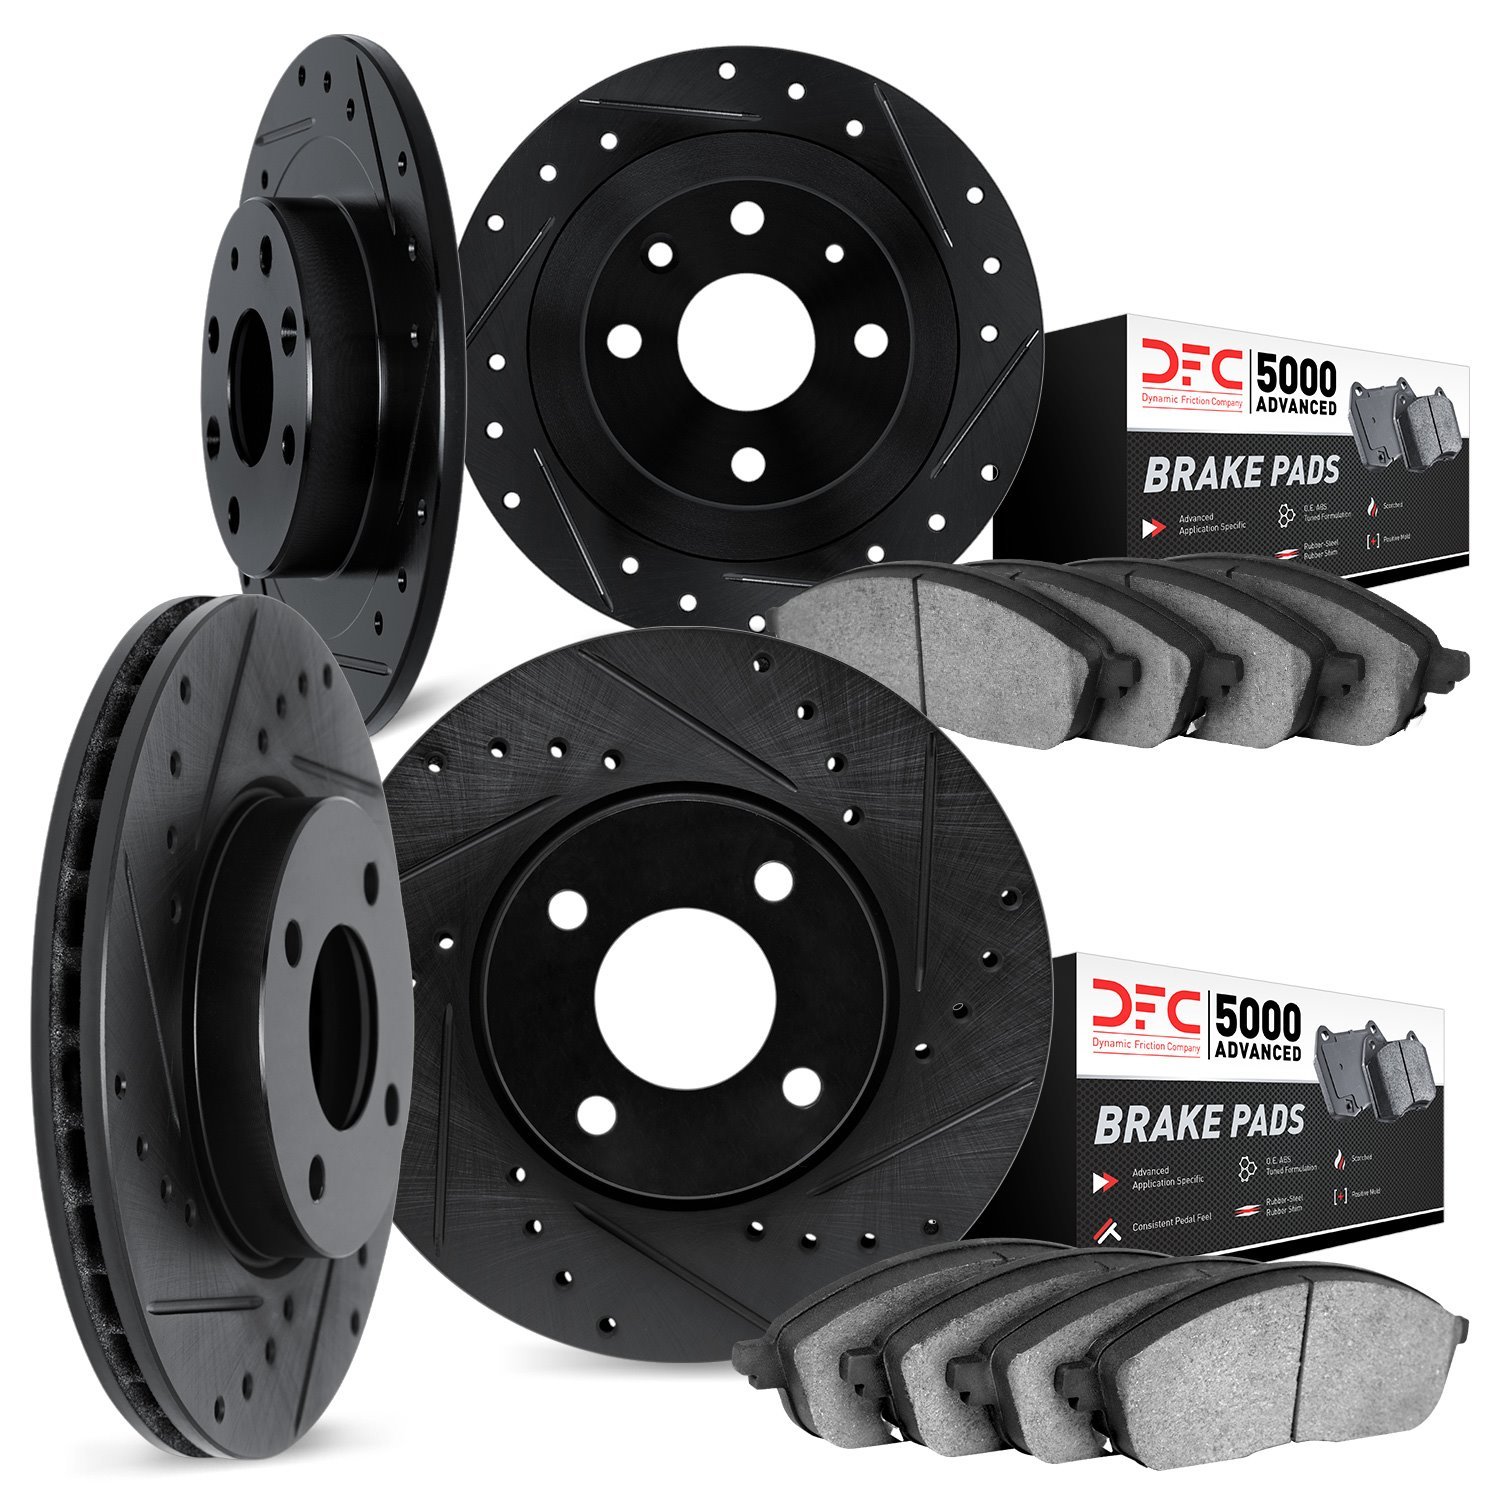 8504-27002 Drilled/Slotted Brake Rotors w/5000 Advanced Brake Pads Kit [Black], 2000-2004 Volvo, Position: Front and Rear